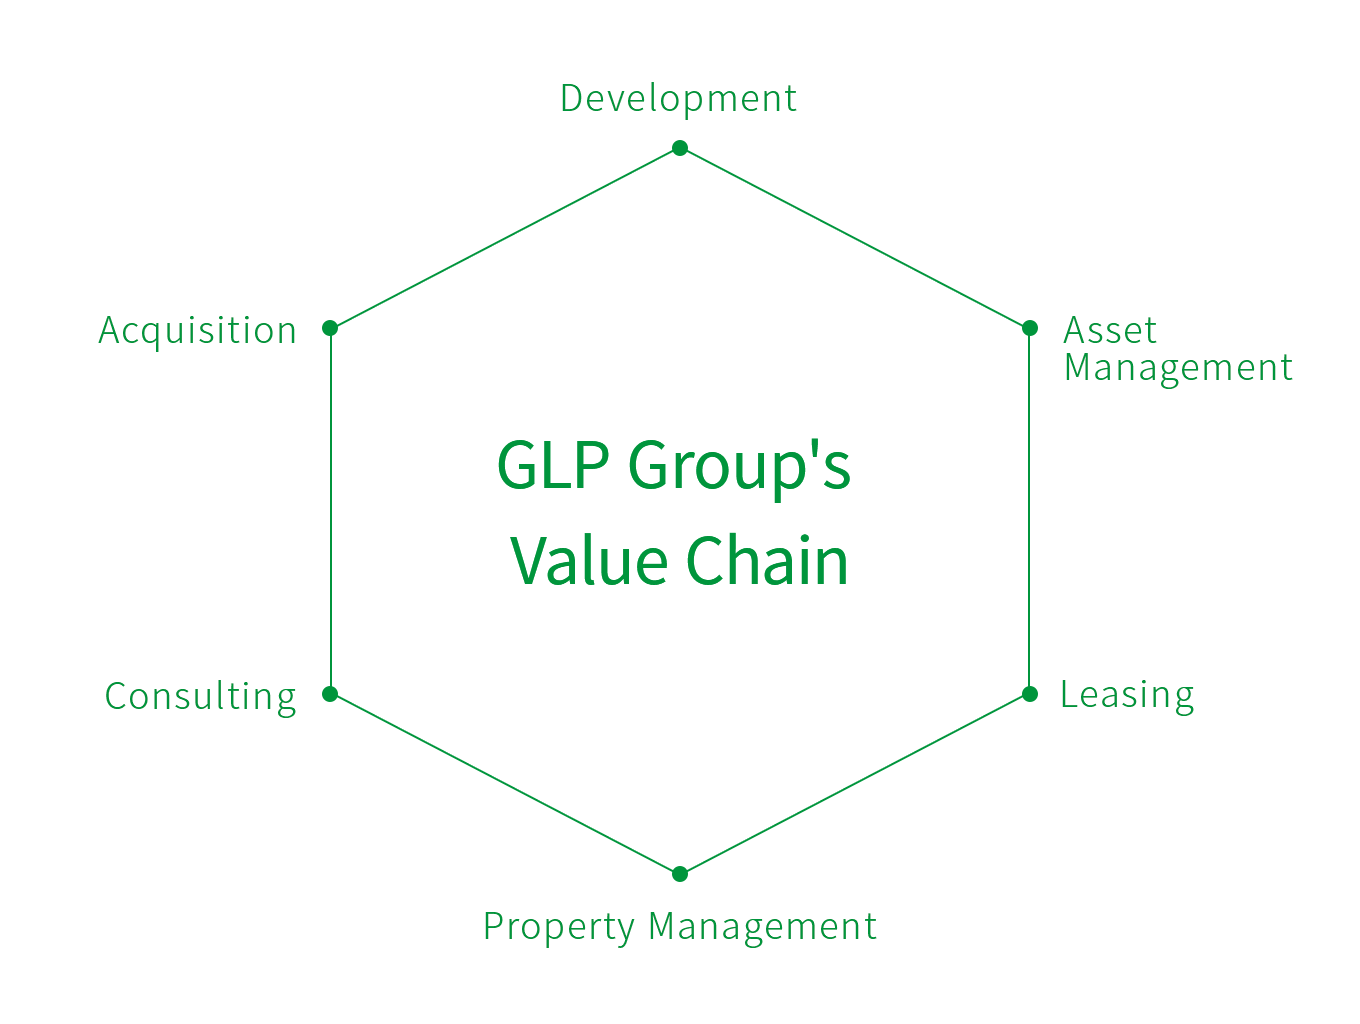 Utilization of GLP Group's Value Chain